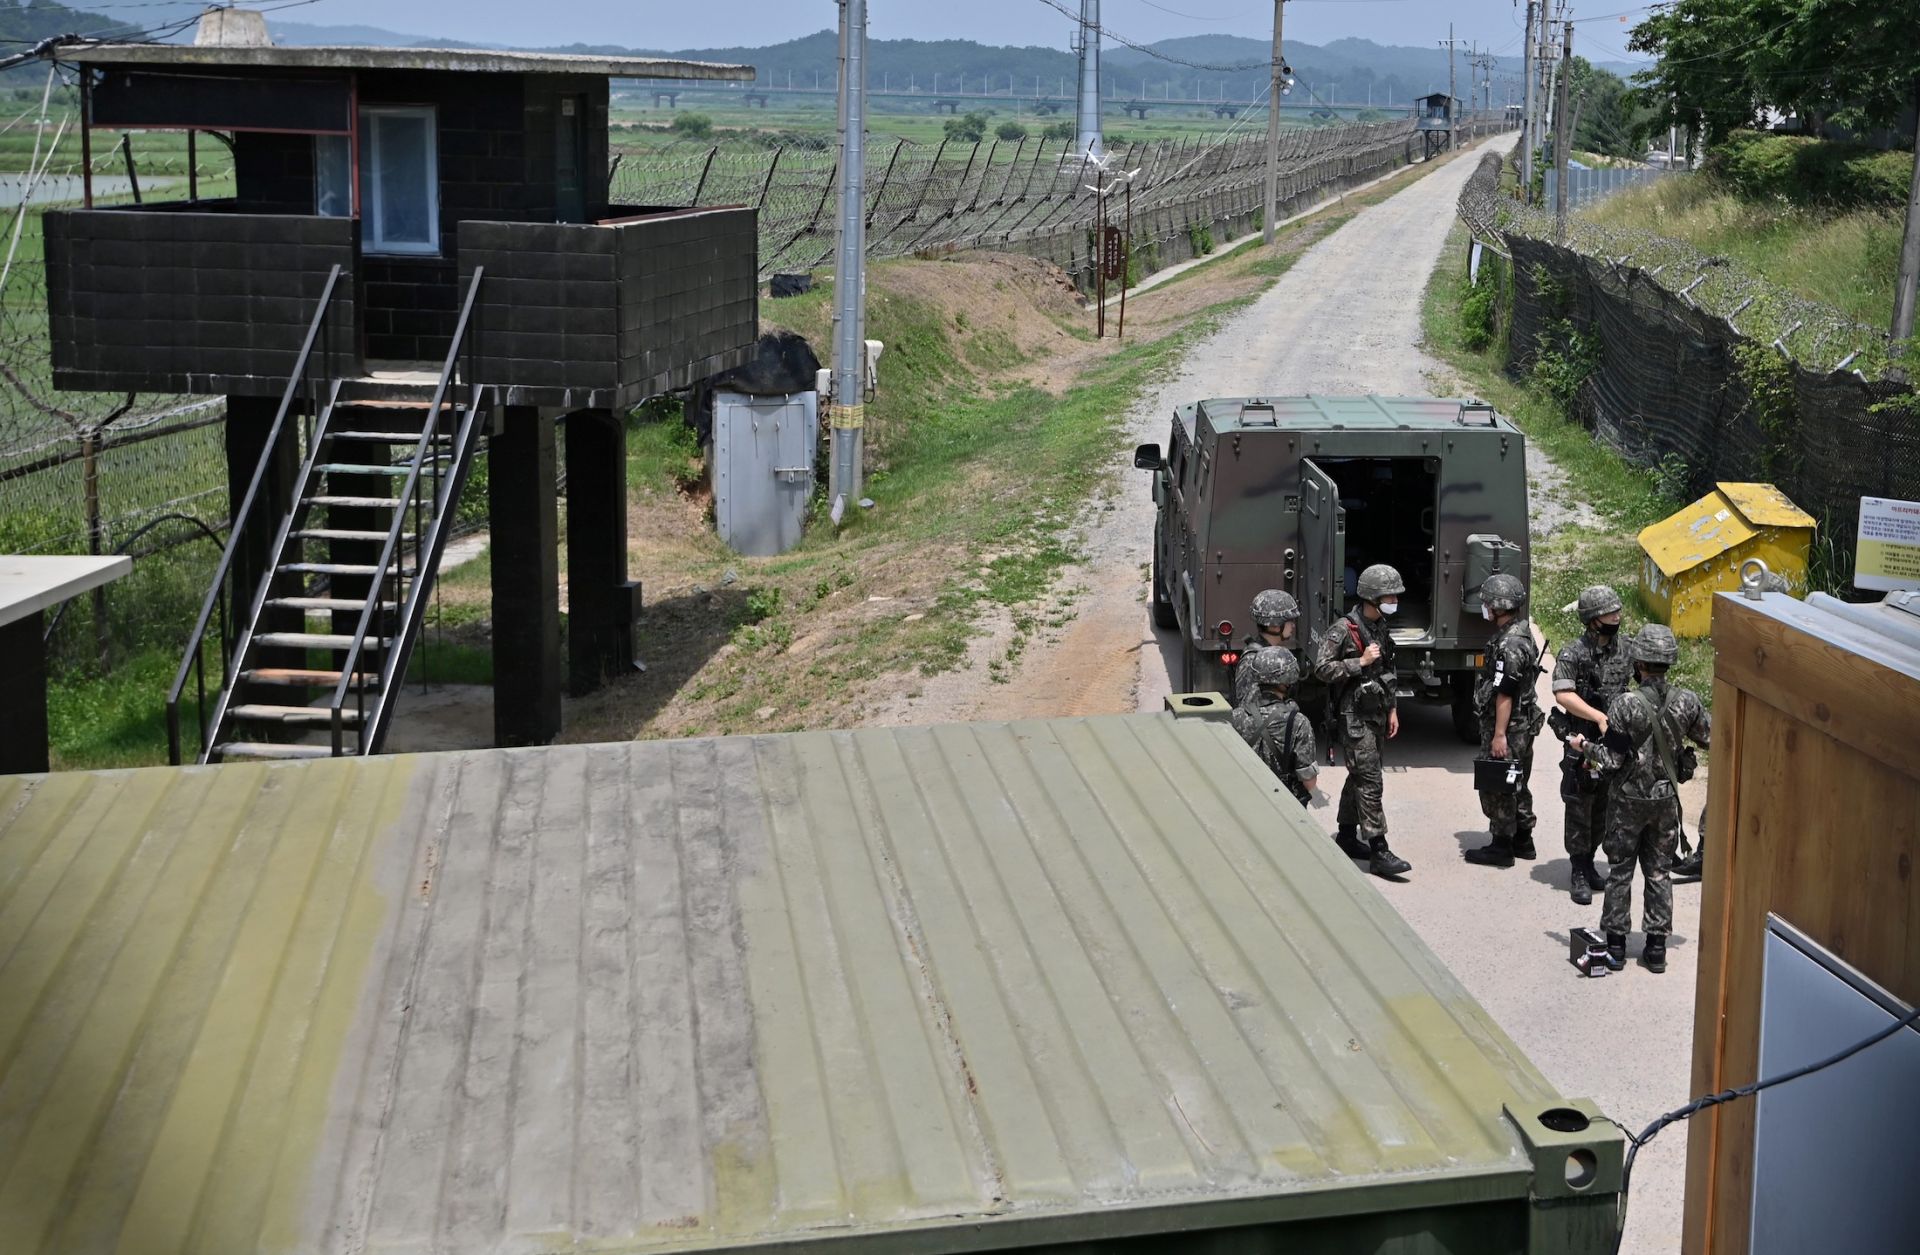 South Korean soldiers gather near a guard post in the border city of Paju, South Korea, on June 17, 2020.